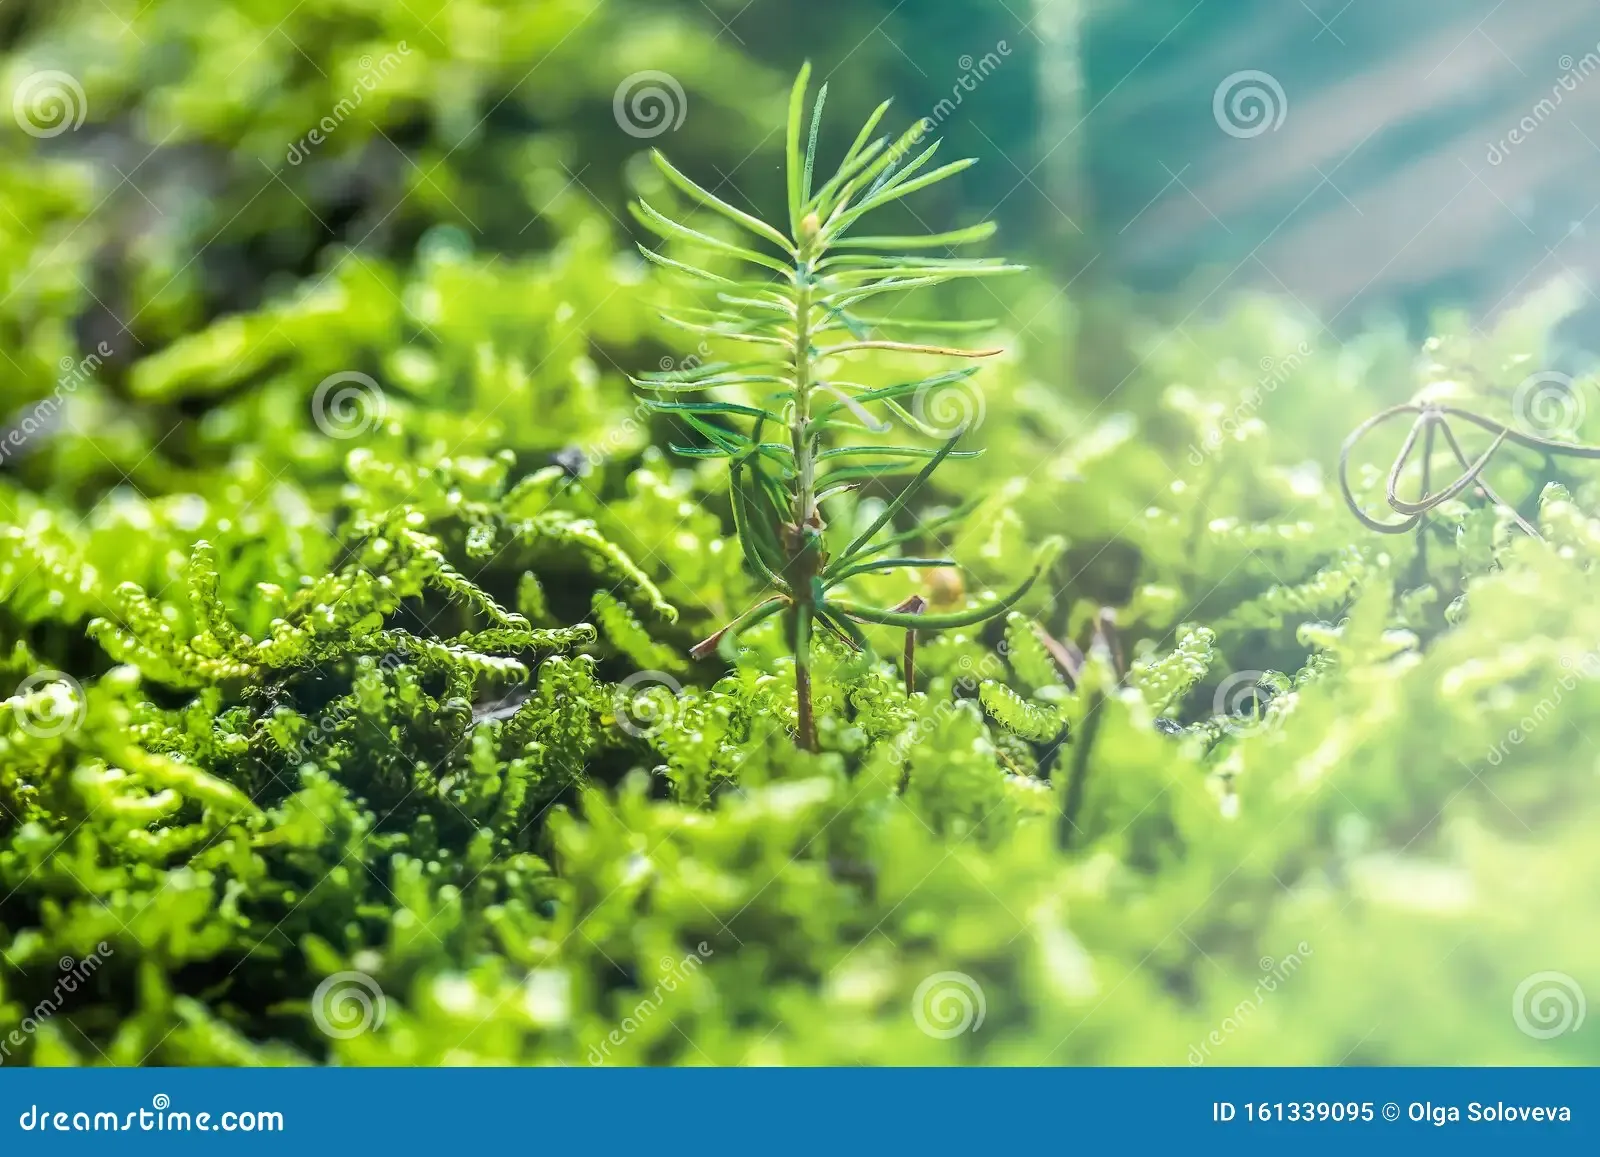 small-spruce-sprouts-fresh-green-moss-ecosystem-concept-small-spruce-sprouts-fresh-green-moss-ecosystem-concept-161339095.jpg